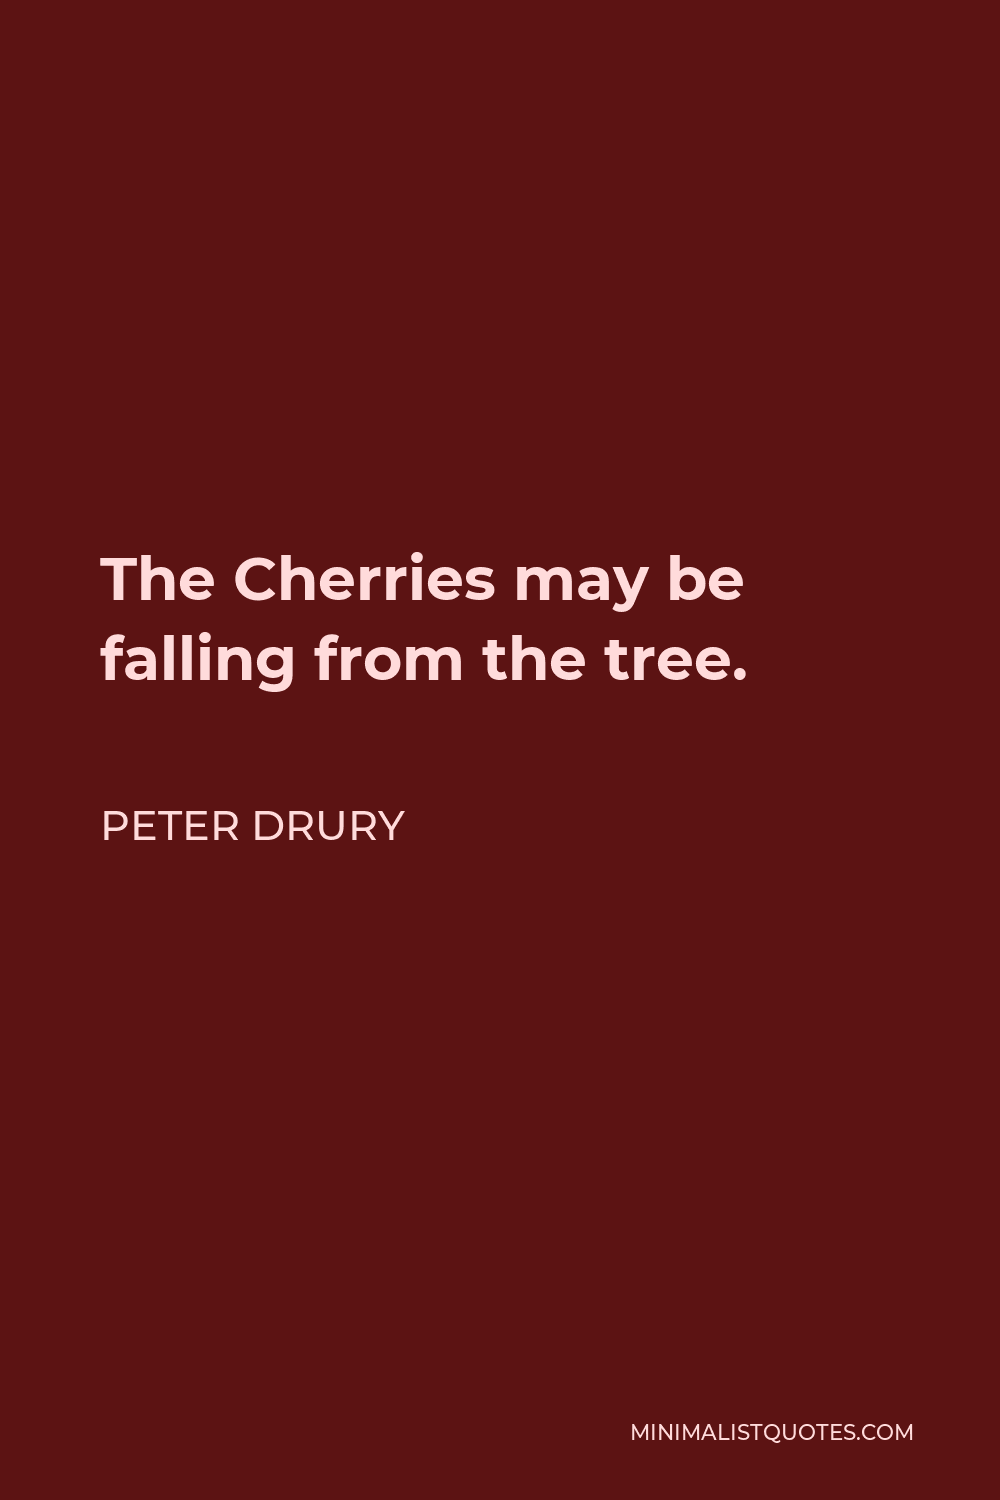 Peter Drury Quote - The Cherries may be falling from the tree.